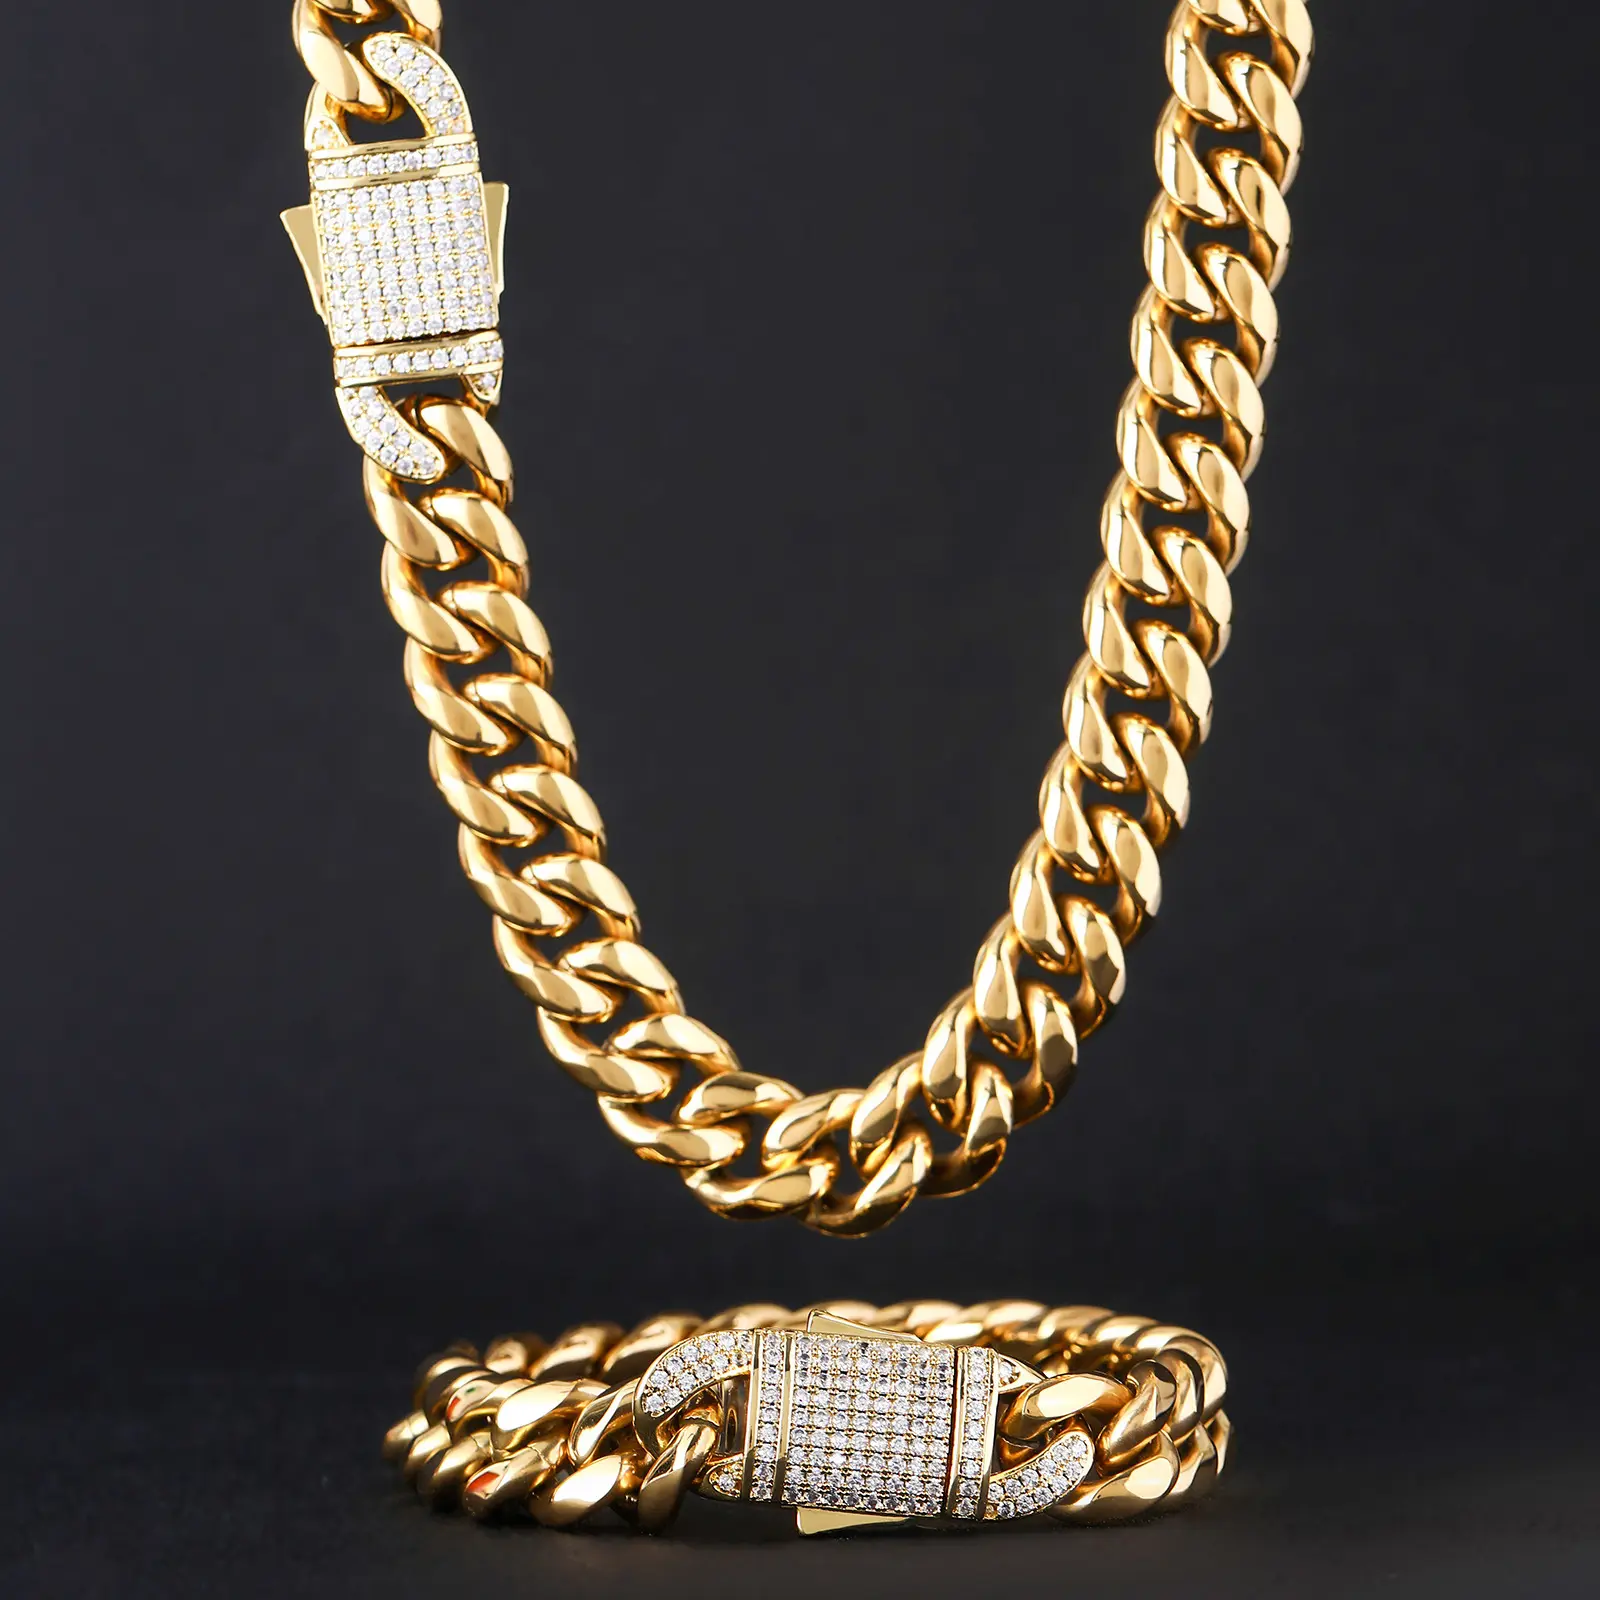 Hip Hop 6-18 mm wide stainless steel Cuban chain gold chain men's 14K 18K Gold Cuban chain necklace